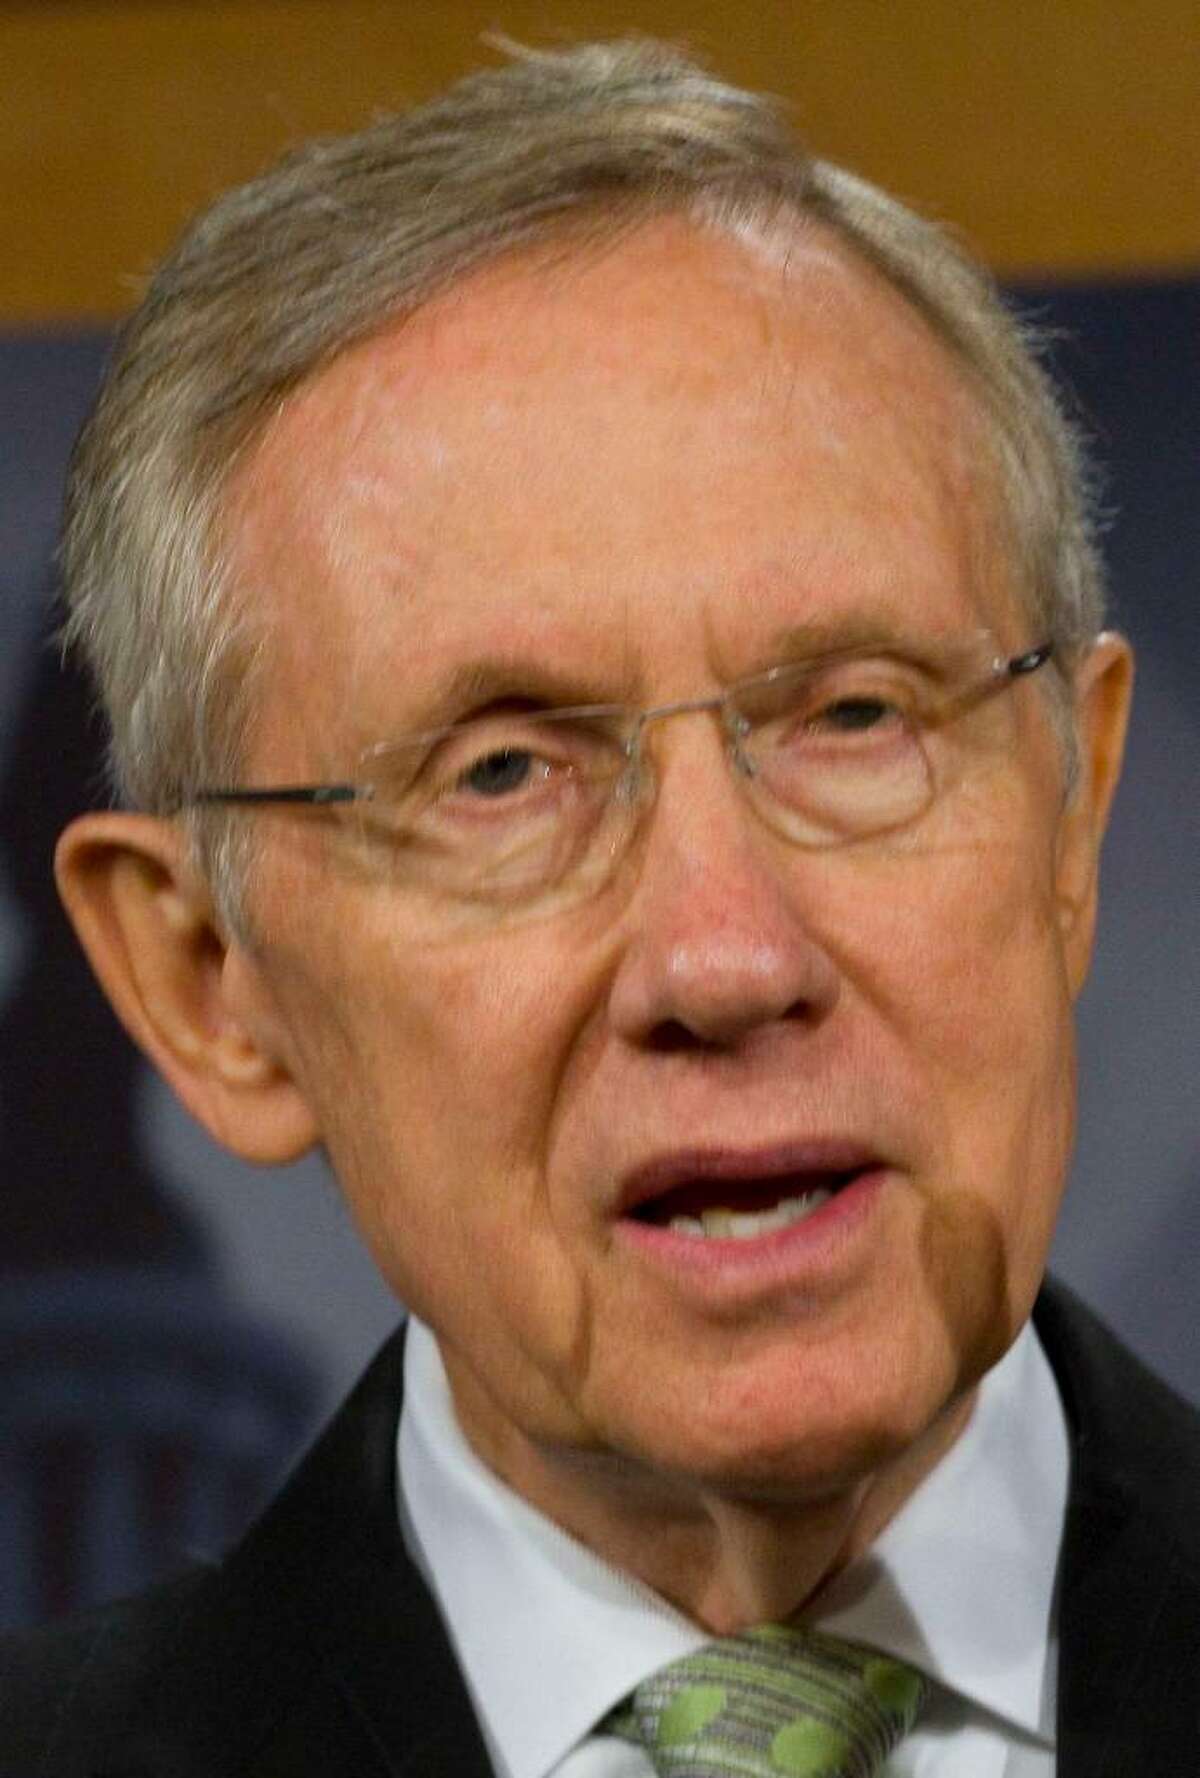 U.S. Sen. Joseph Lieberman is scheduled to hold a fundraiser for embattled Senate Majority Leader Harry Reid, pictured here, in Greenwich Sunday, May 2.